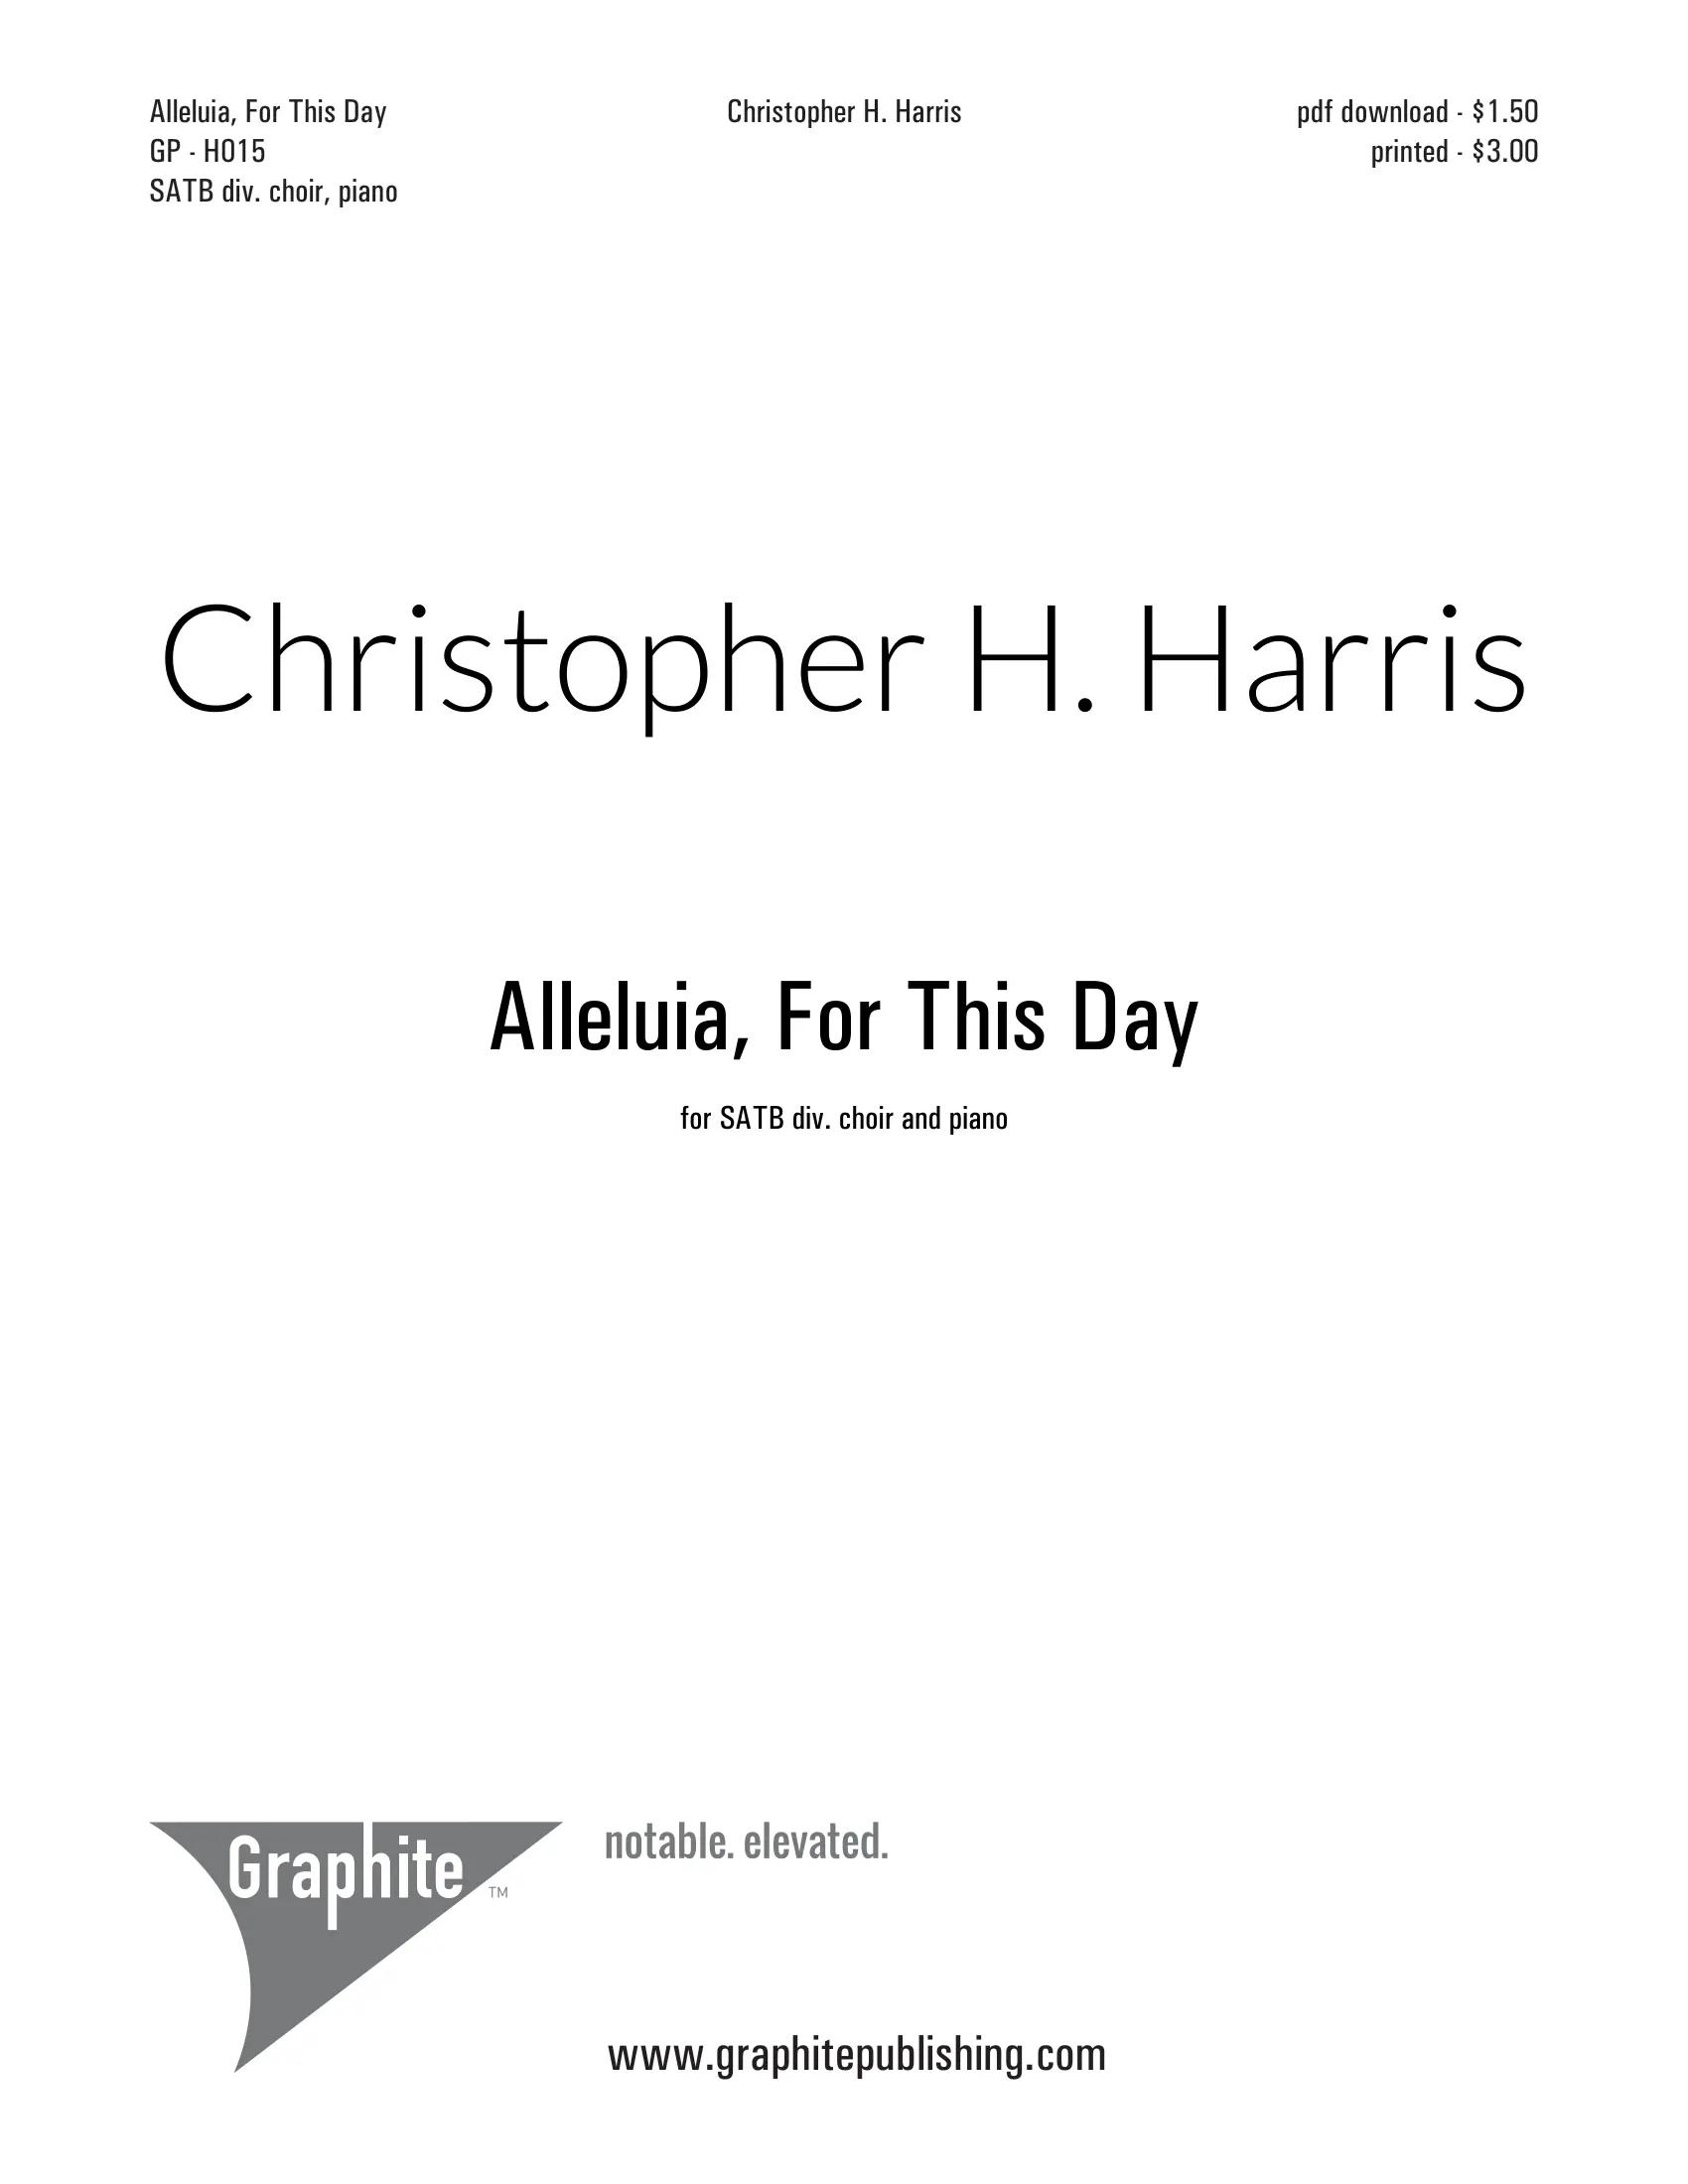 Alleluia, For This Day (SATB)